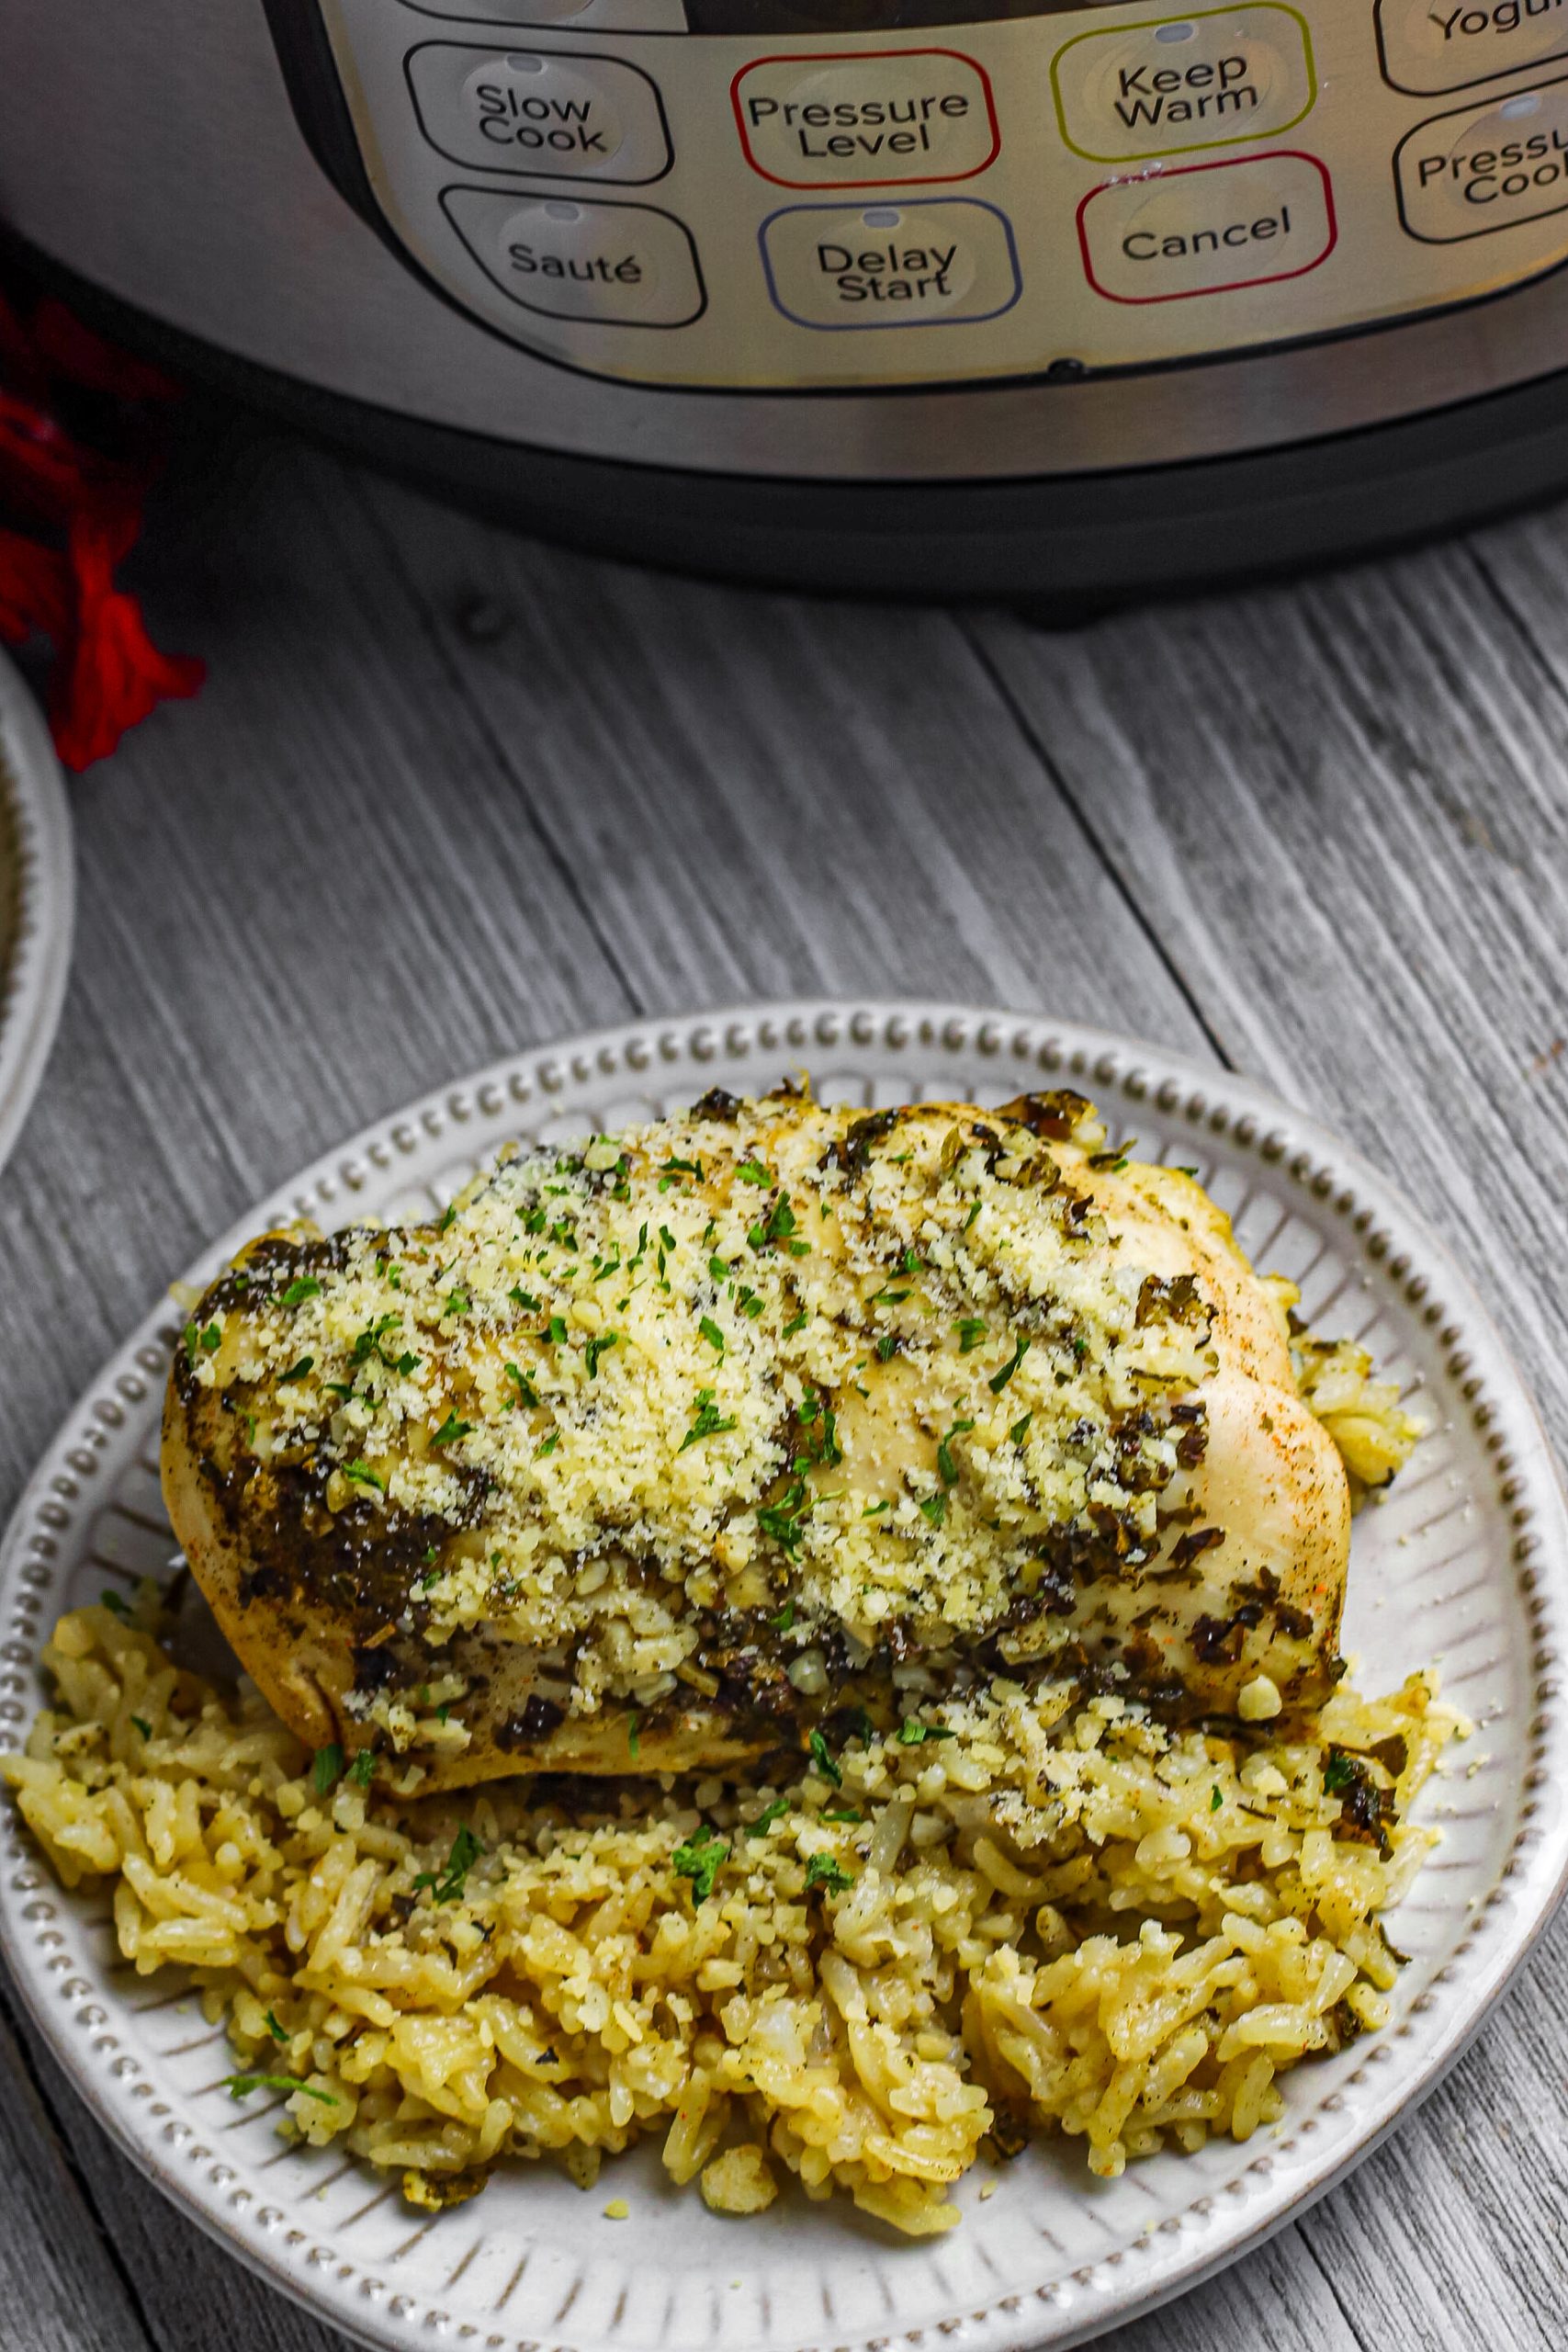 Serve the chicken over the rice and top with grated parmesan cheese (optional).